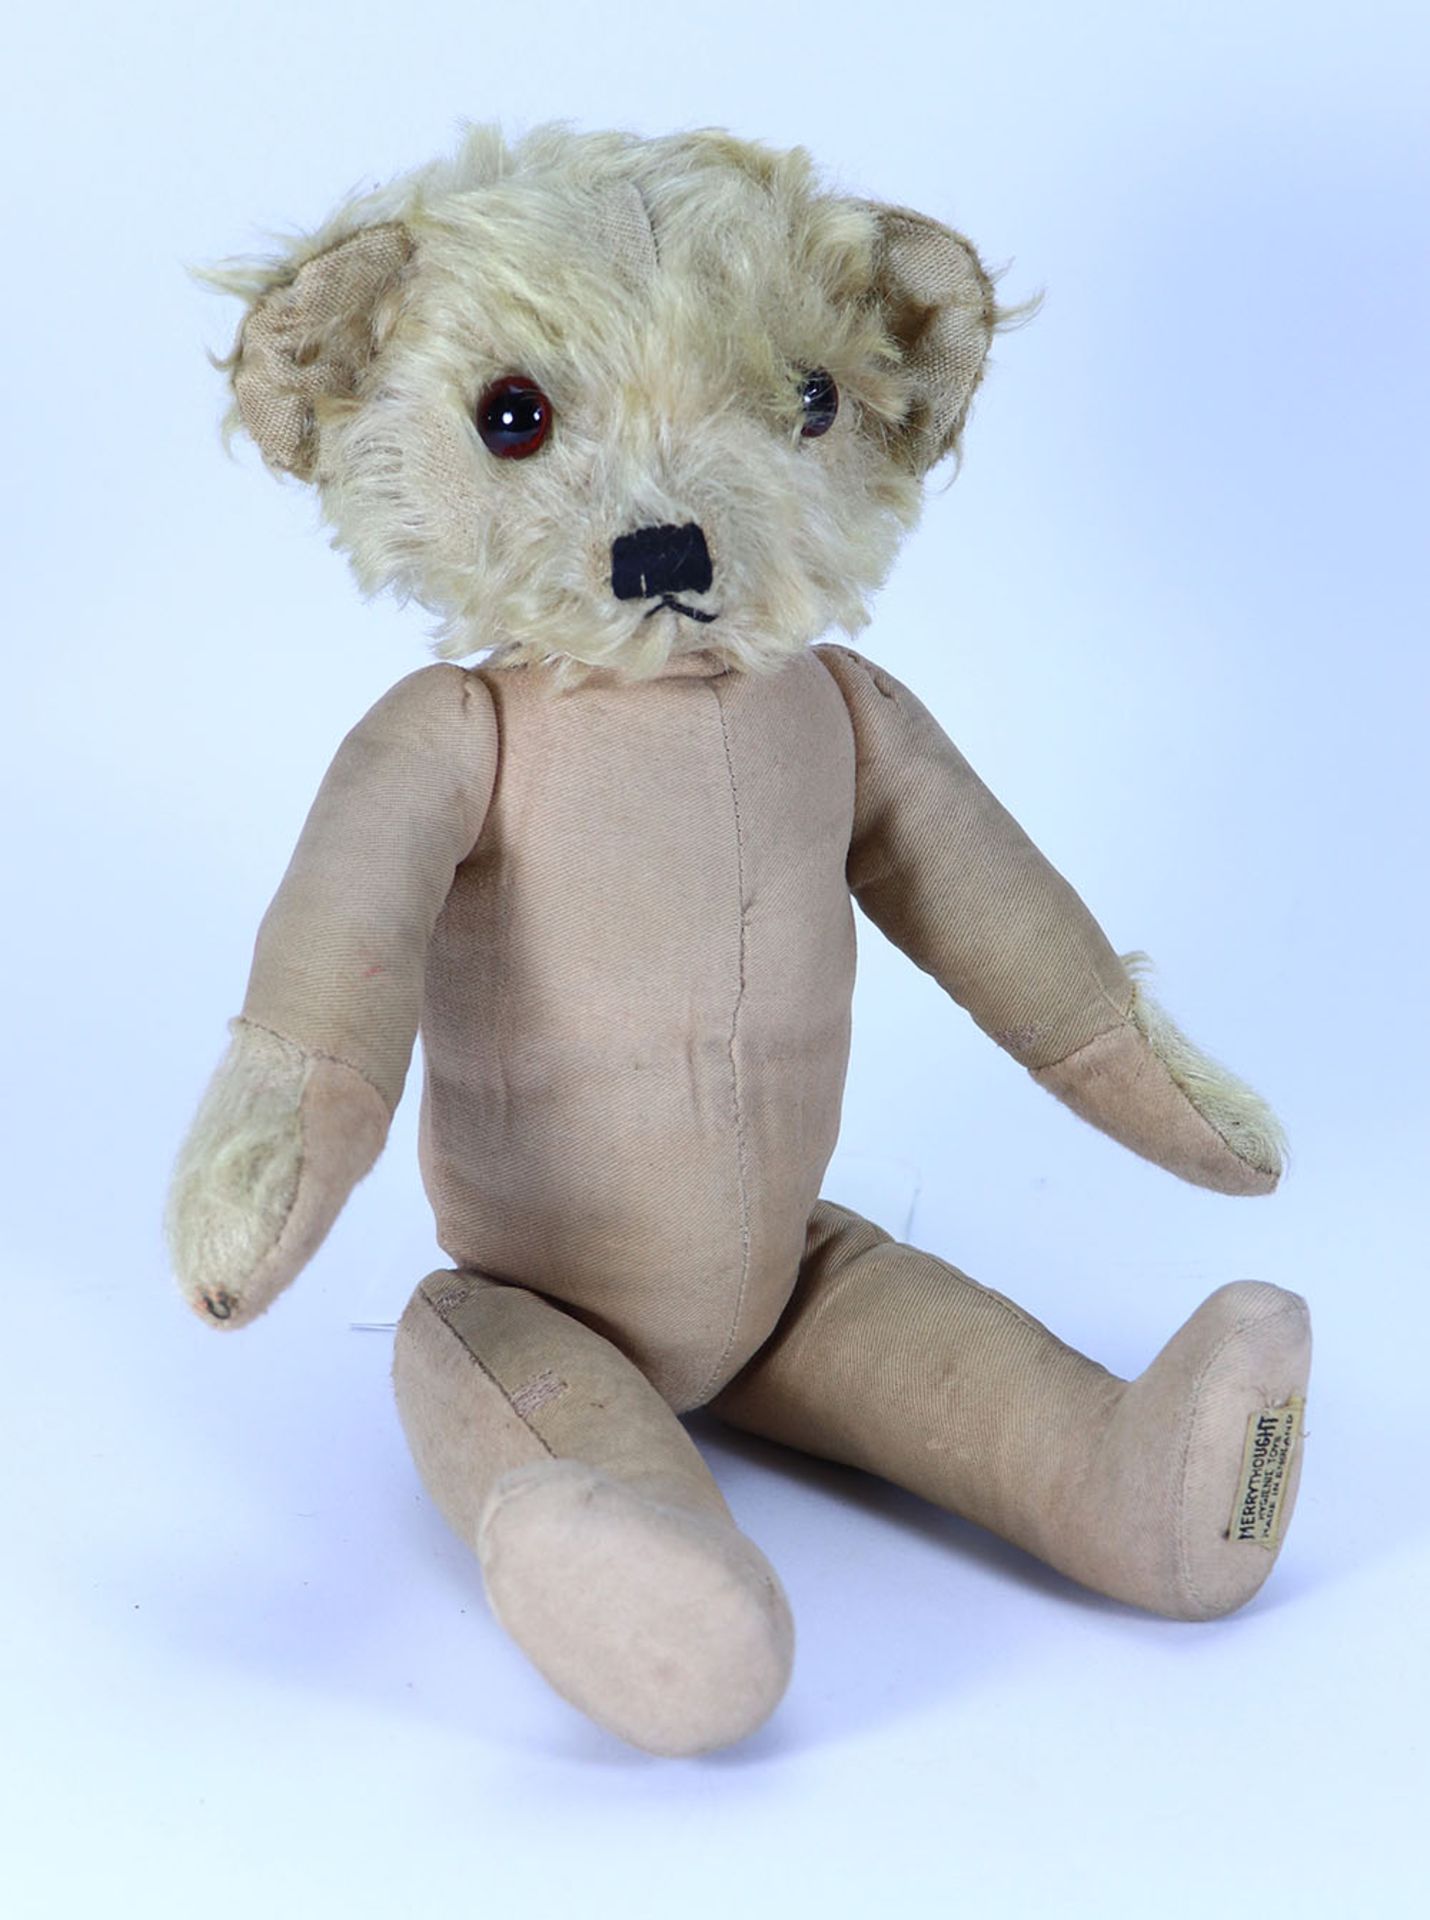 A scares Merrythought cotton bodied Bingie Teddy bear, 1930s, - Image 2 of 4